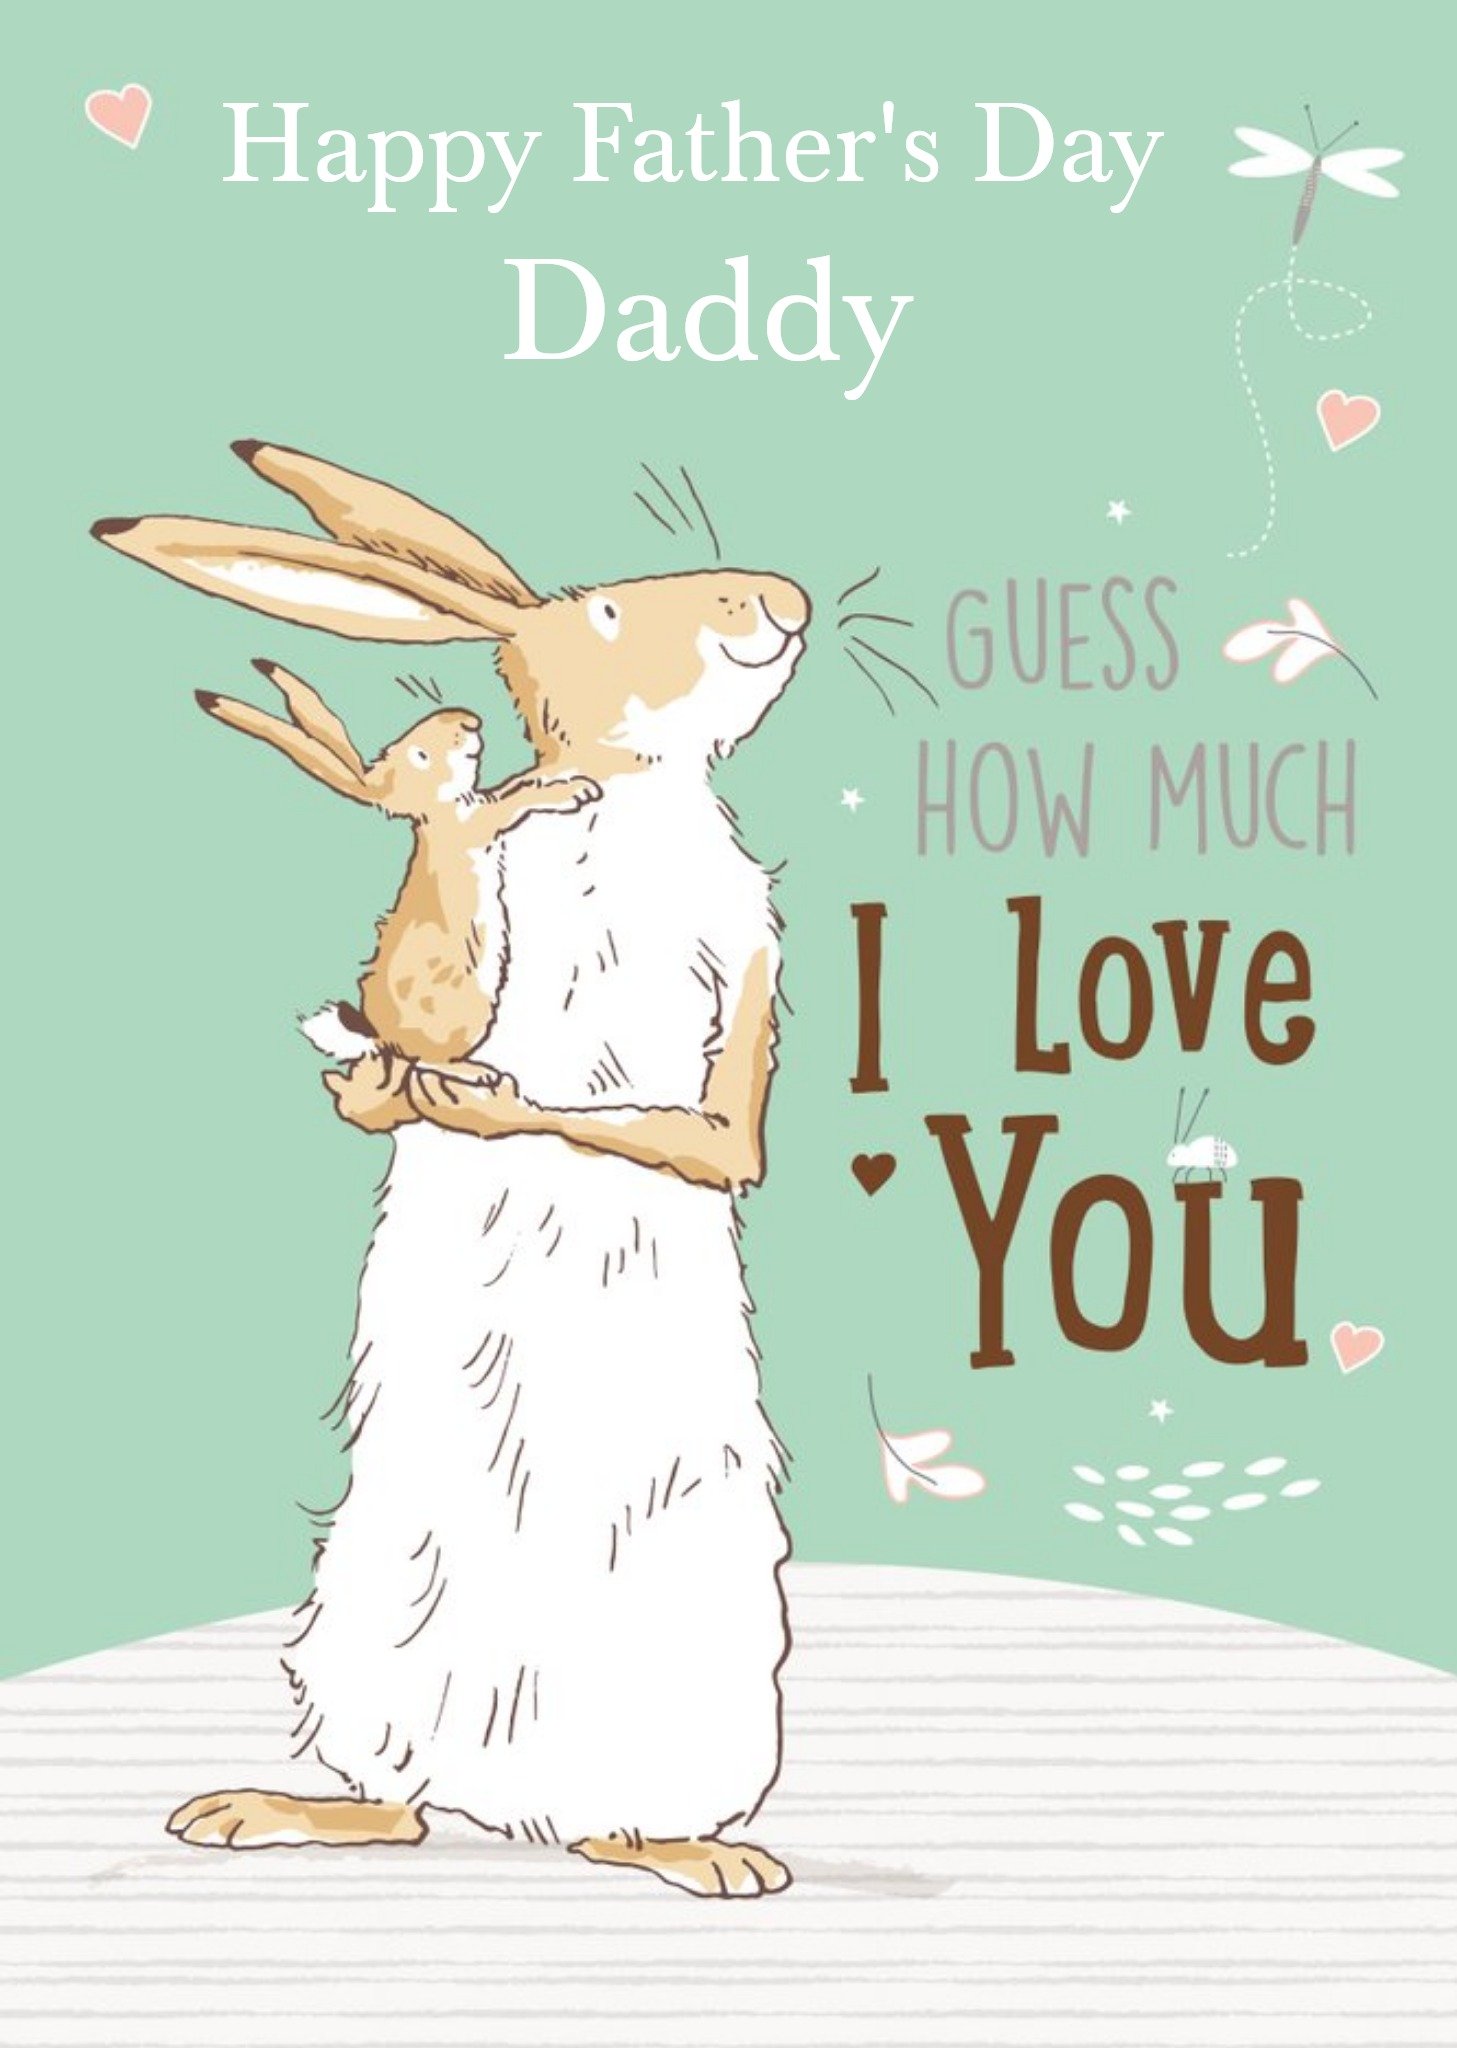 Guess How Much I Love You Danilo Ghmily Happy Father's Day Daddy Card Ecard